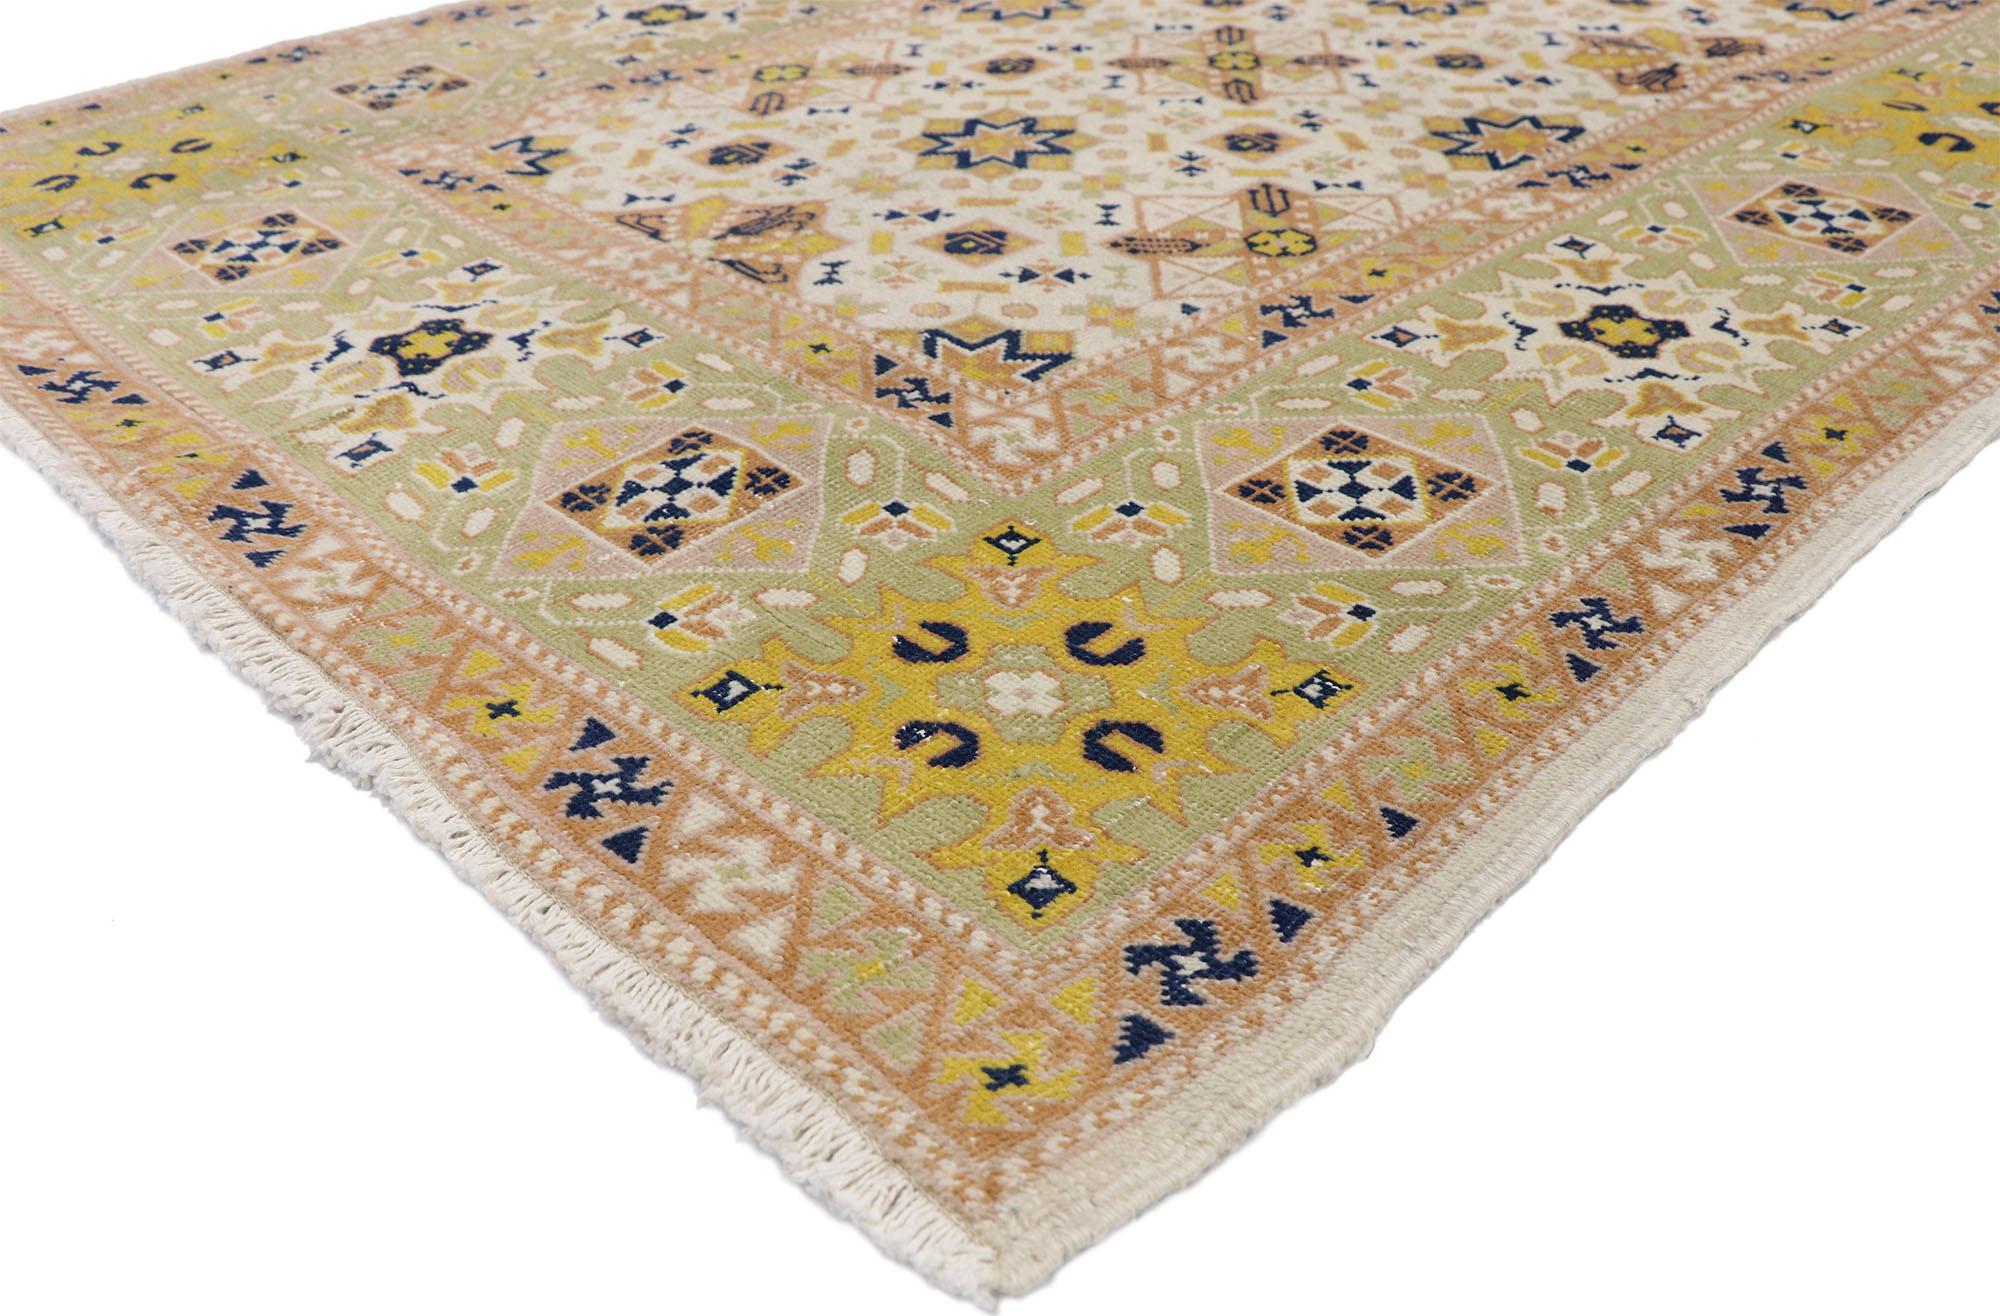 52615 vintage Turkish Sivas rug with geometric design and Islamic Tile Art style. With a bold geometric design and Islamic tile art style, this hand knotted wool vintage Turkish Sivas rug astounds with its beauty. The field is covered in a